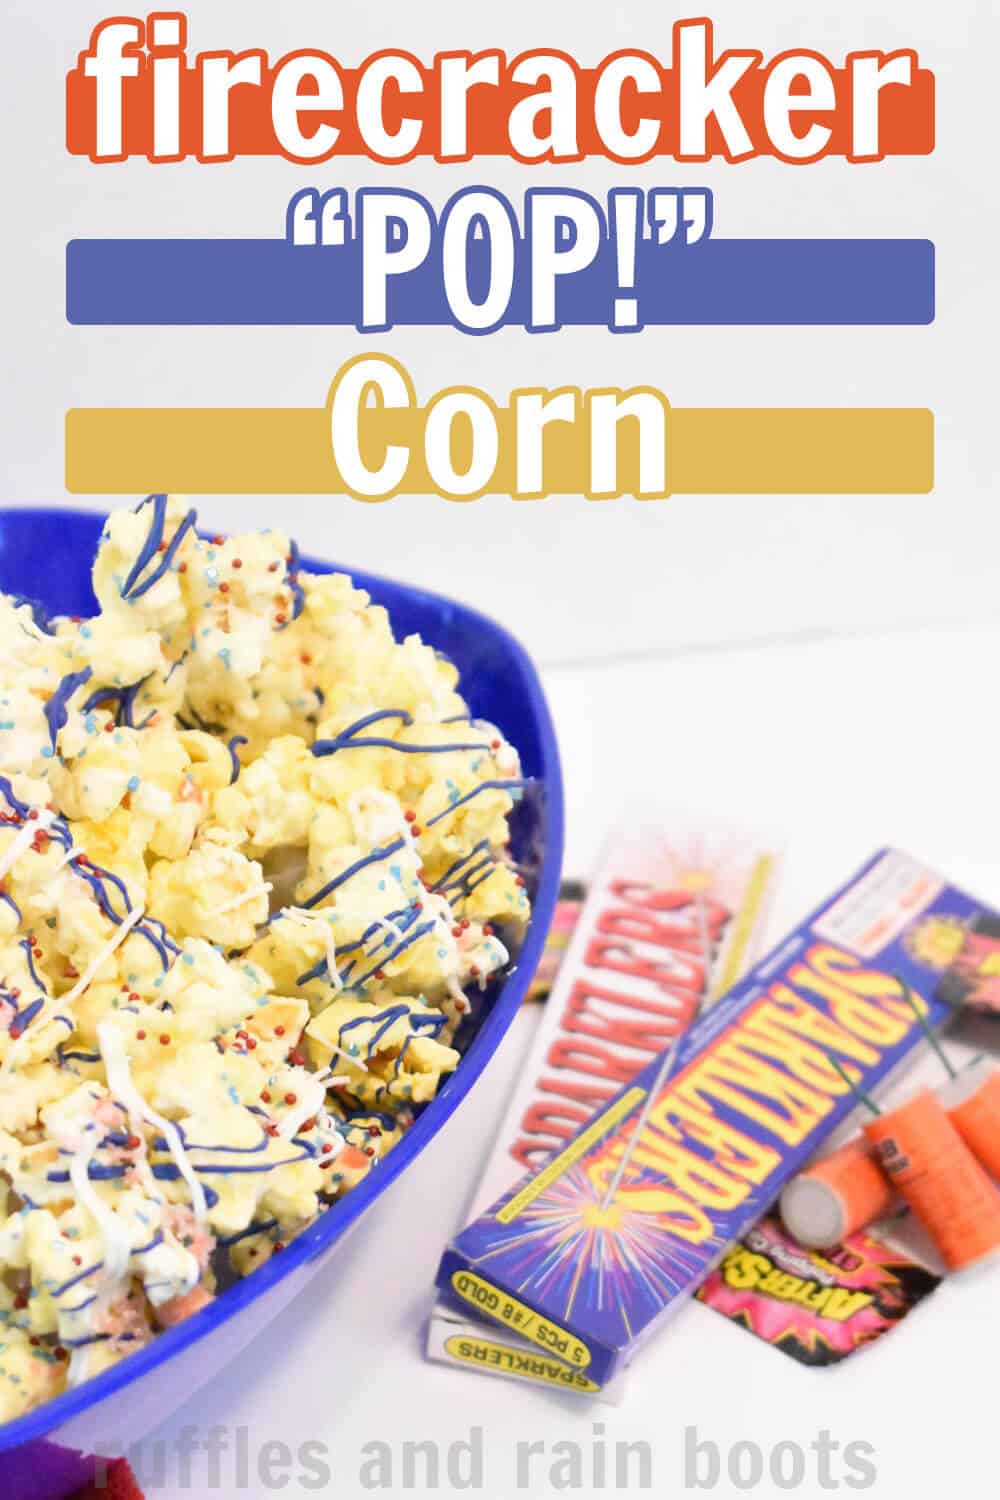 patriotic popcorn on white table with firecracker boxes with text which reads firecracker popcorn